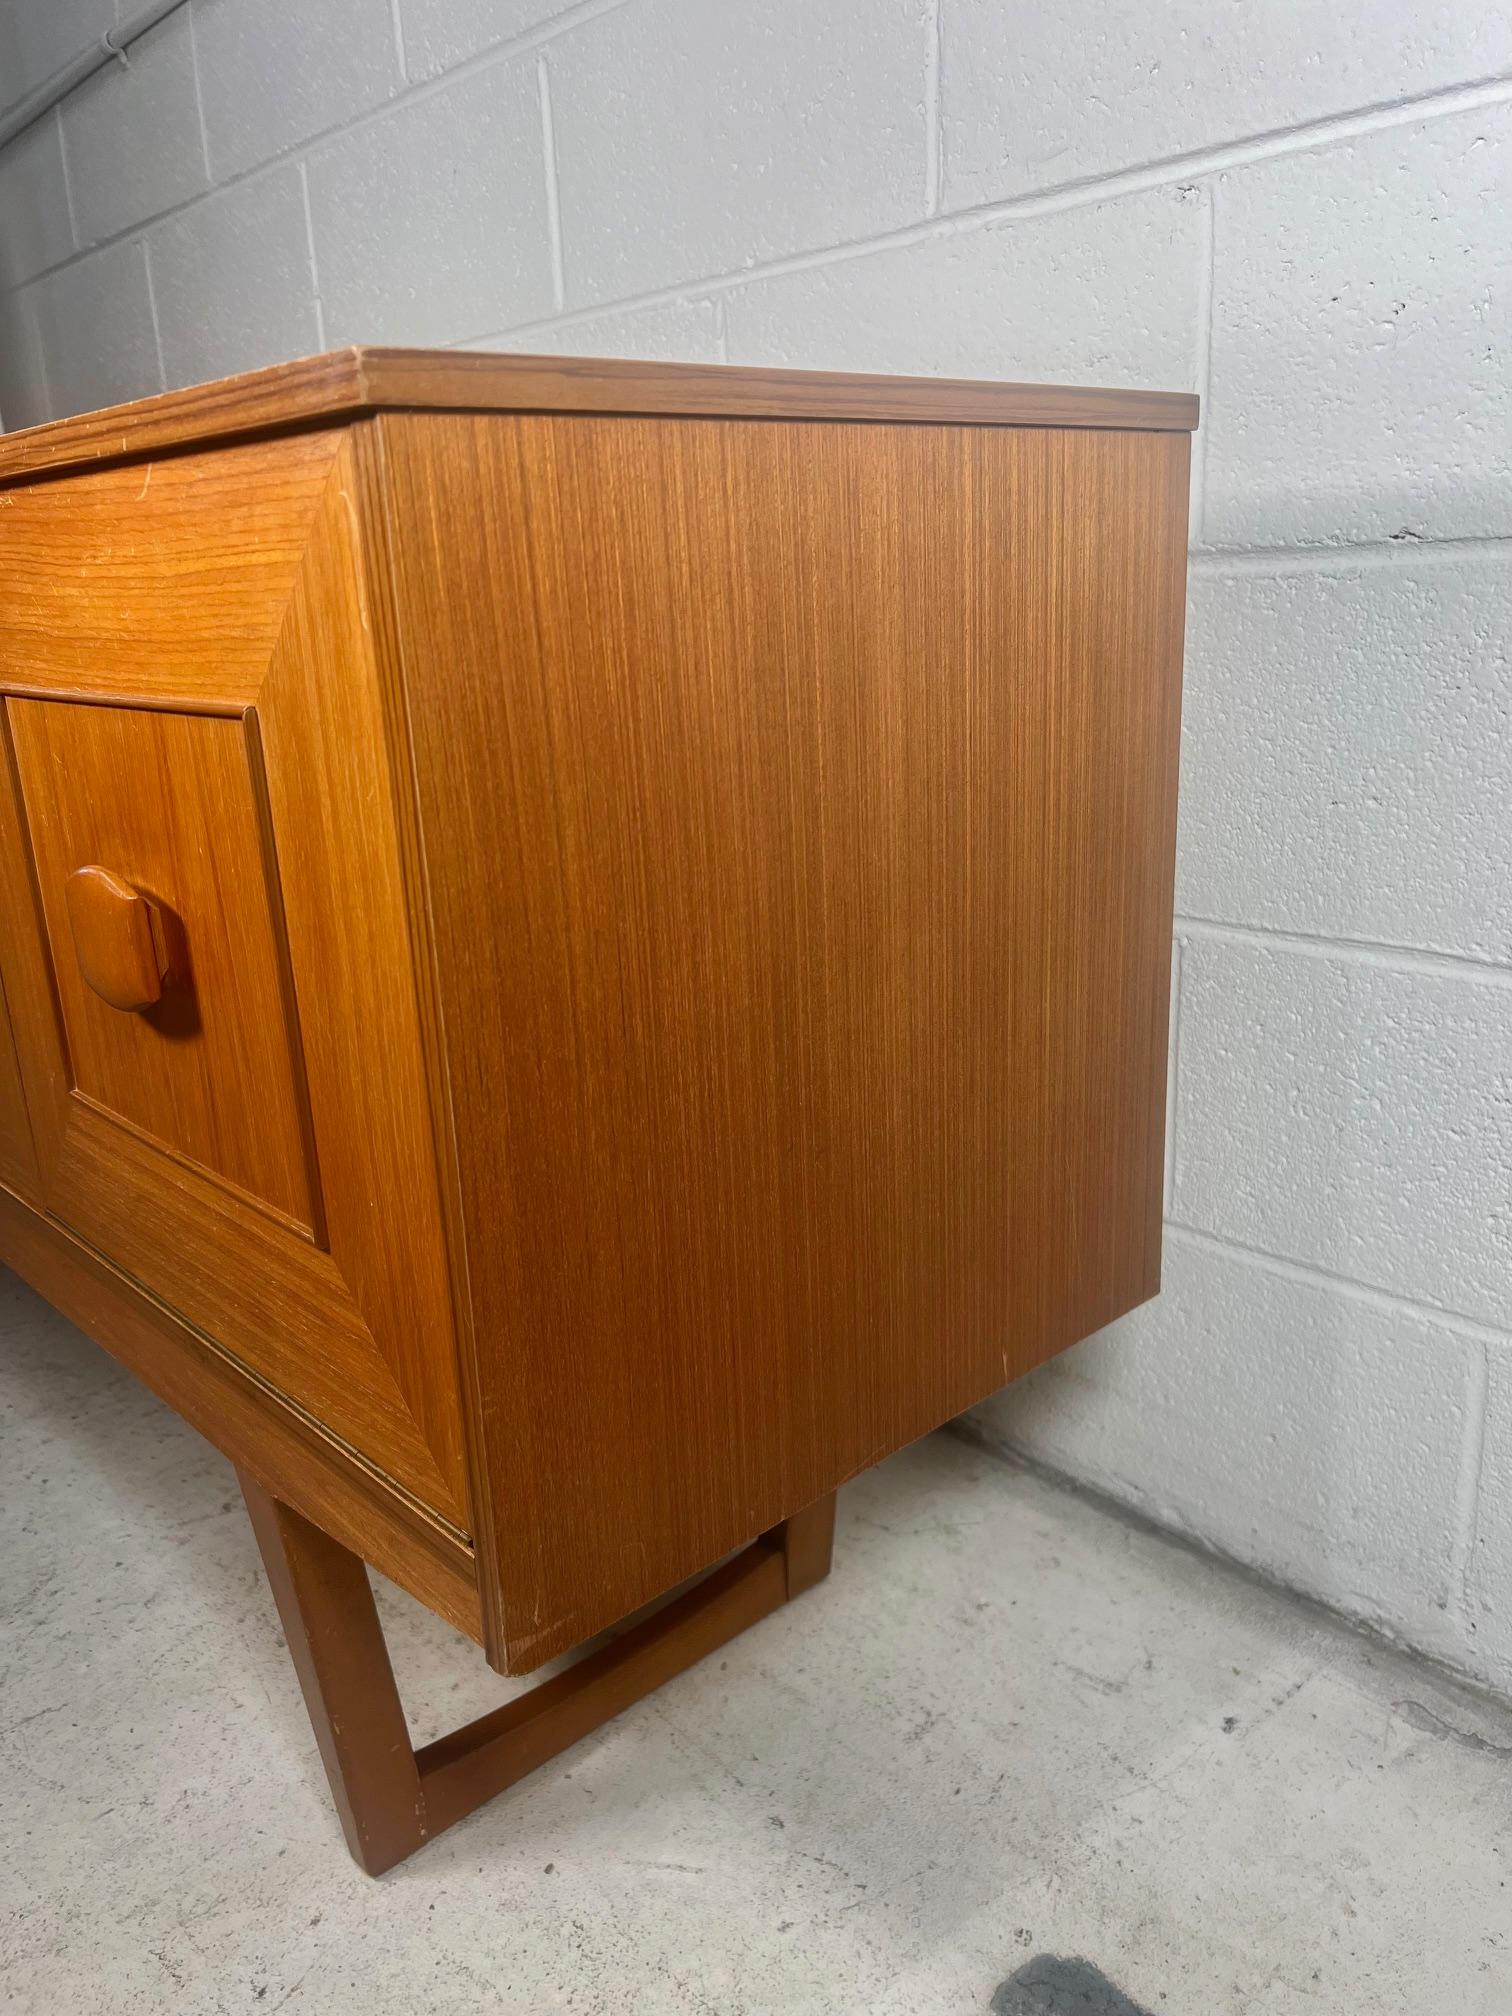 Midcentury Modern Teak Credenza by Stonehill Model Stateroom For Sale 5